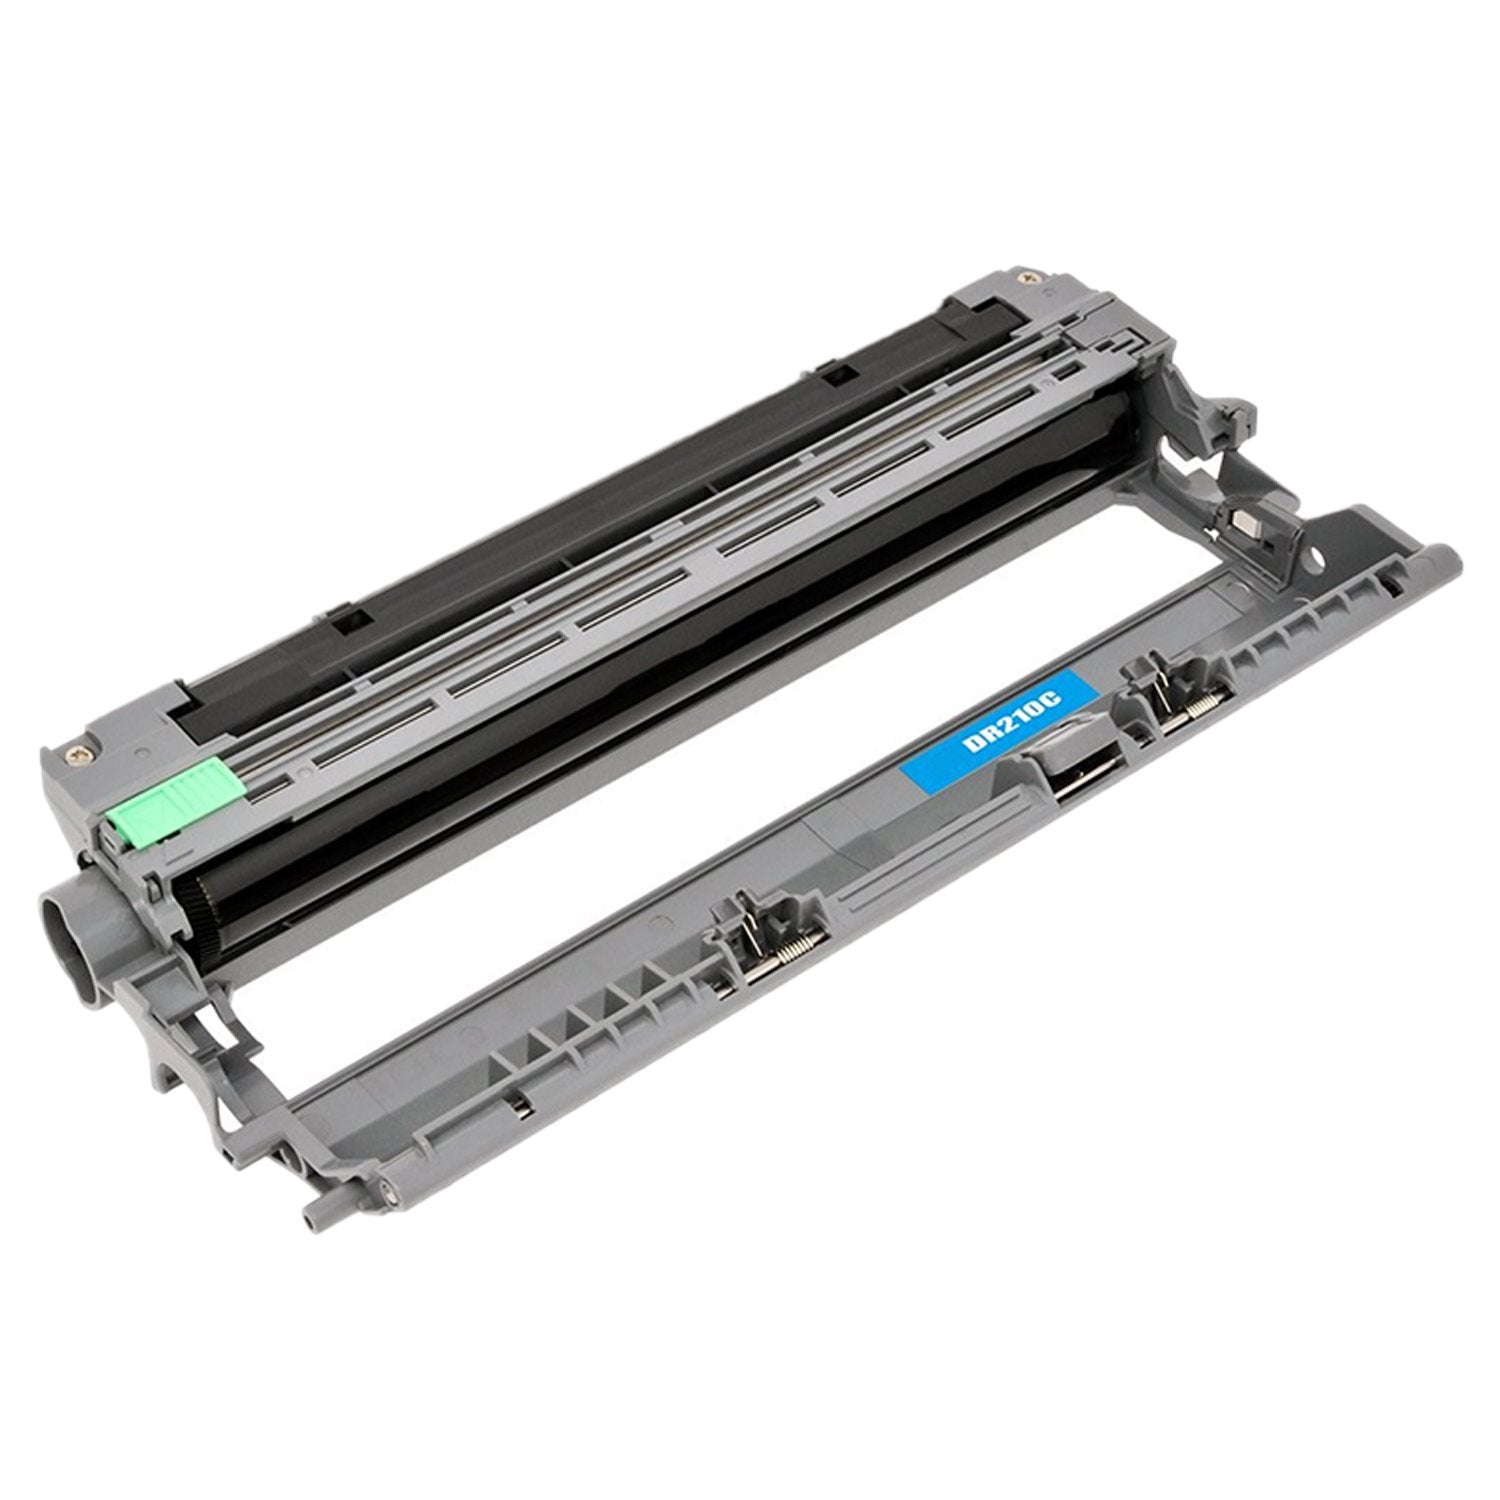 Absolute Toner Compatible Brother DR210 Cyan Drum Unit Toner Cartridge | Absolute Toner Brother Toner Cartridges